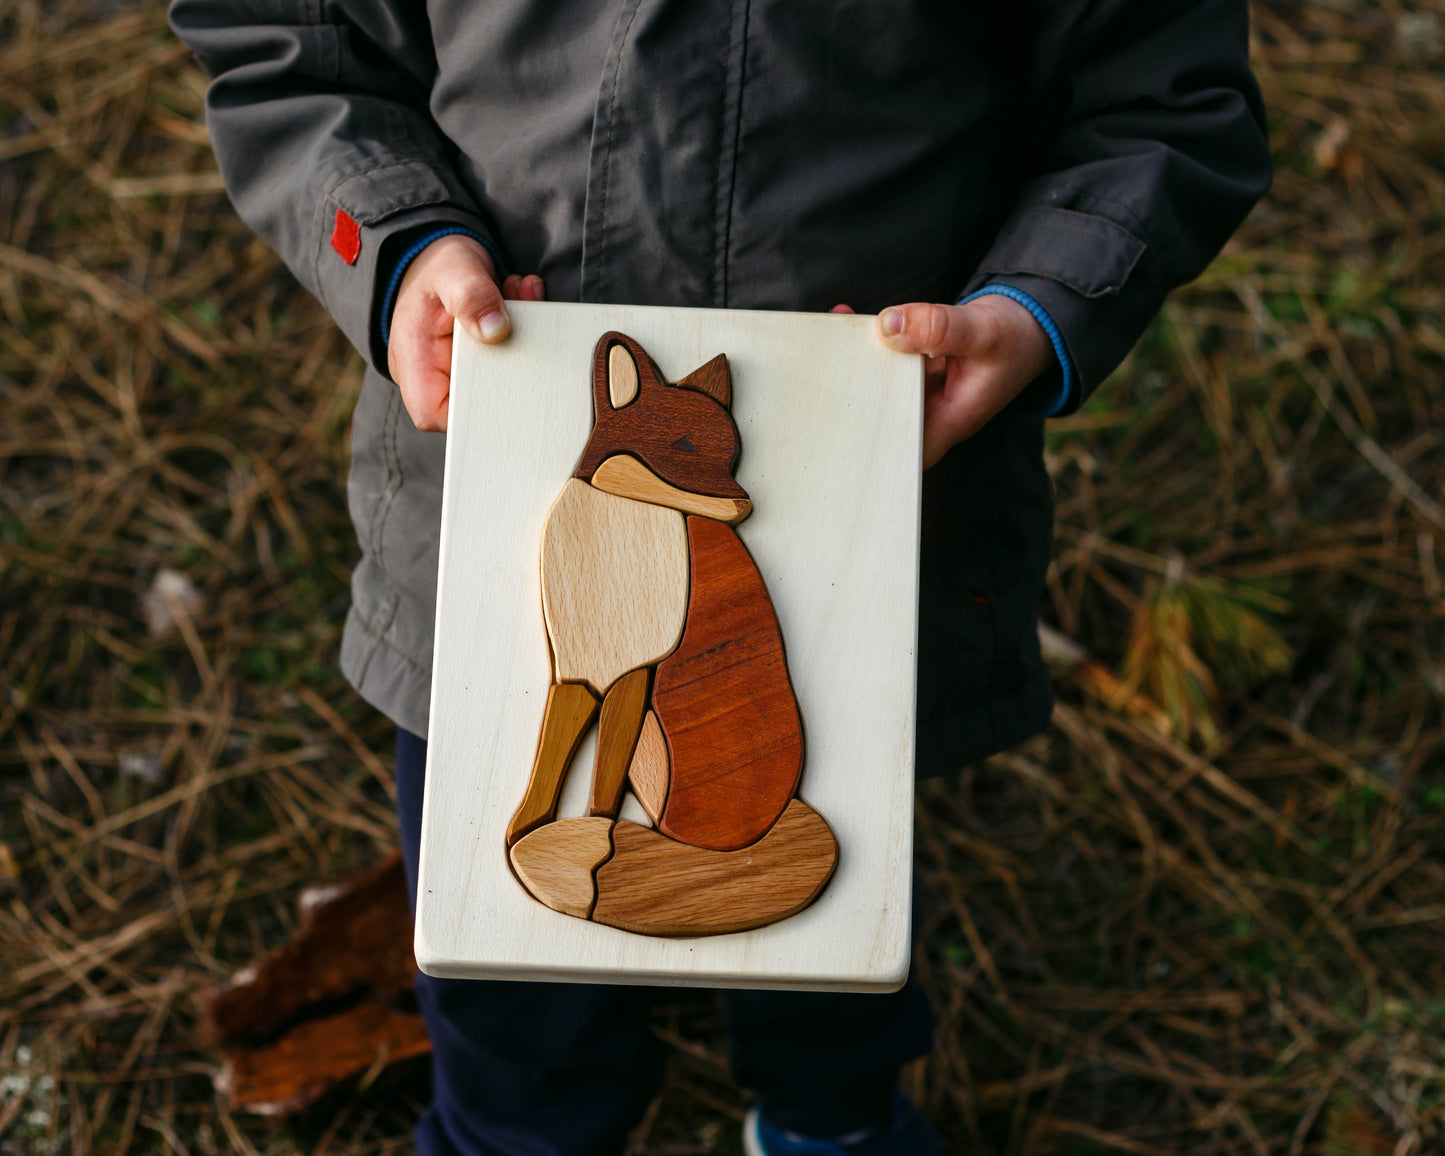 Wooden toy puzzle fox from Cocoletes, carried by a boy on his hands